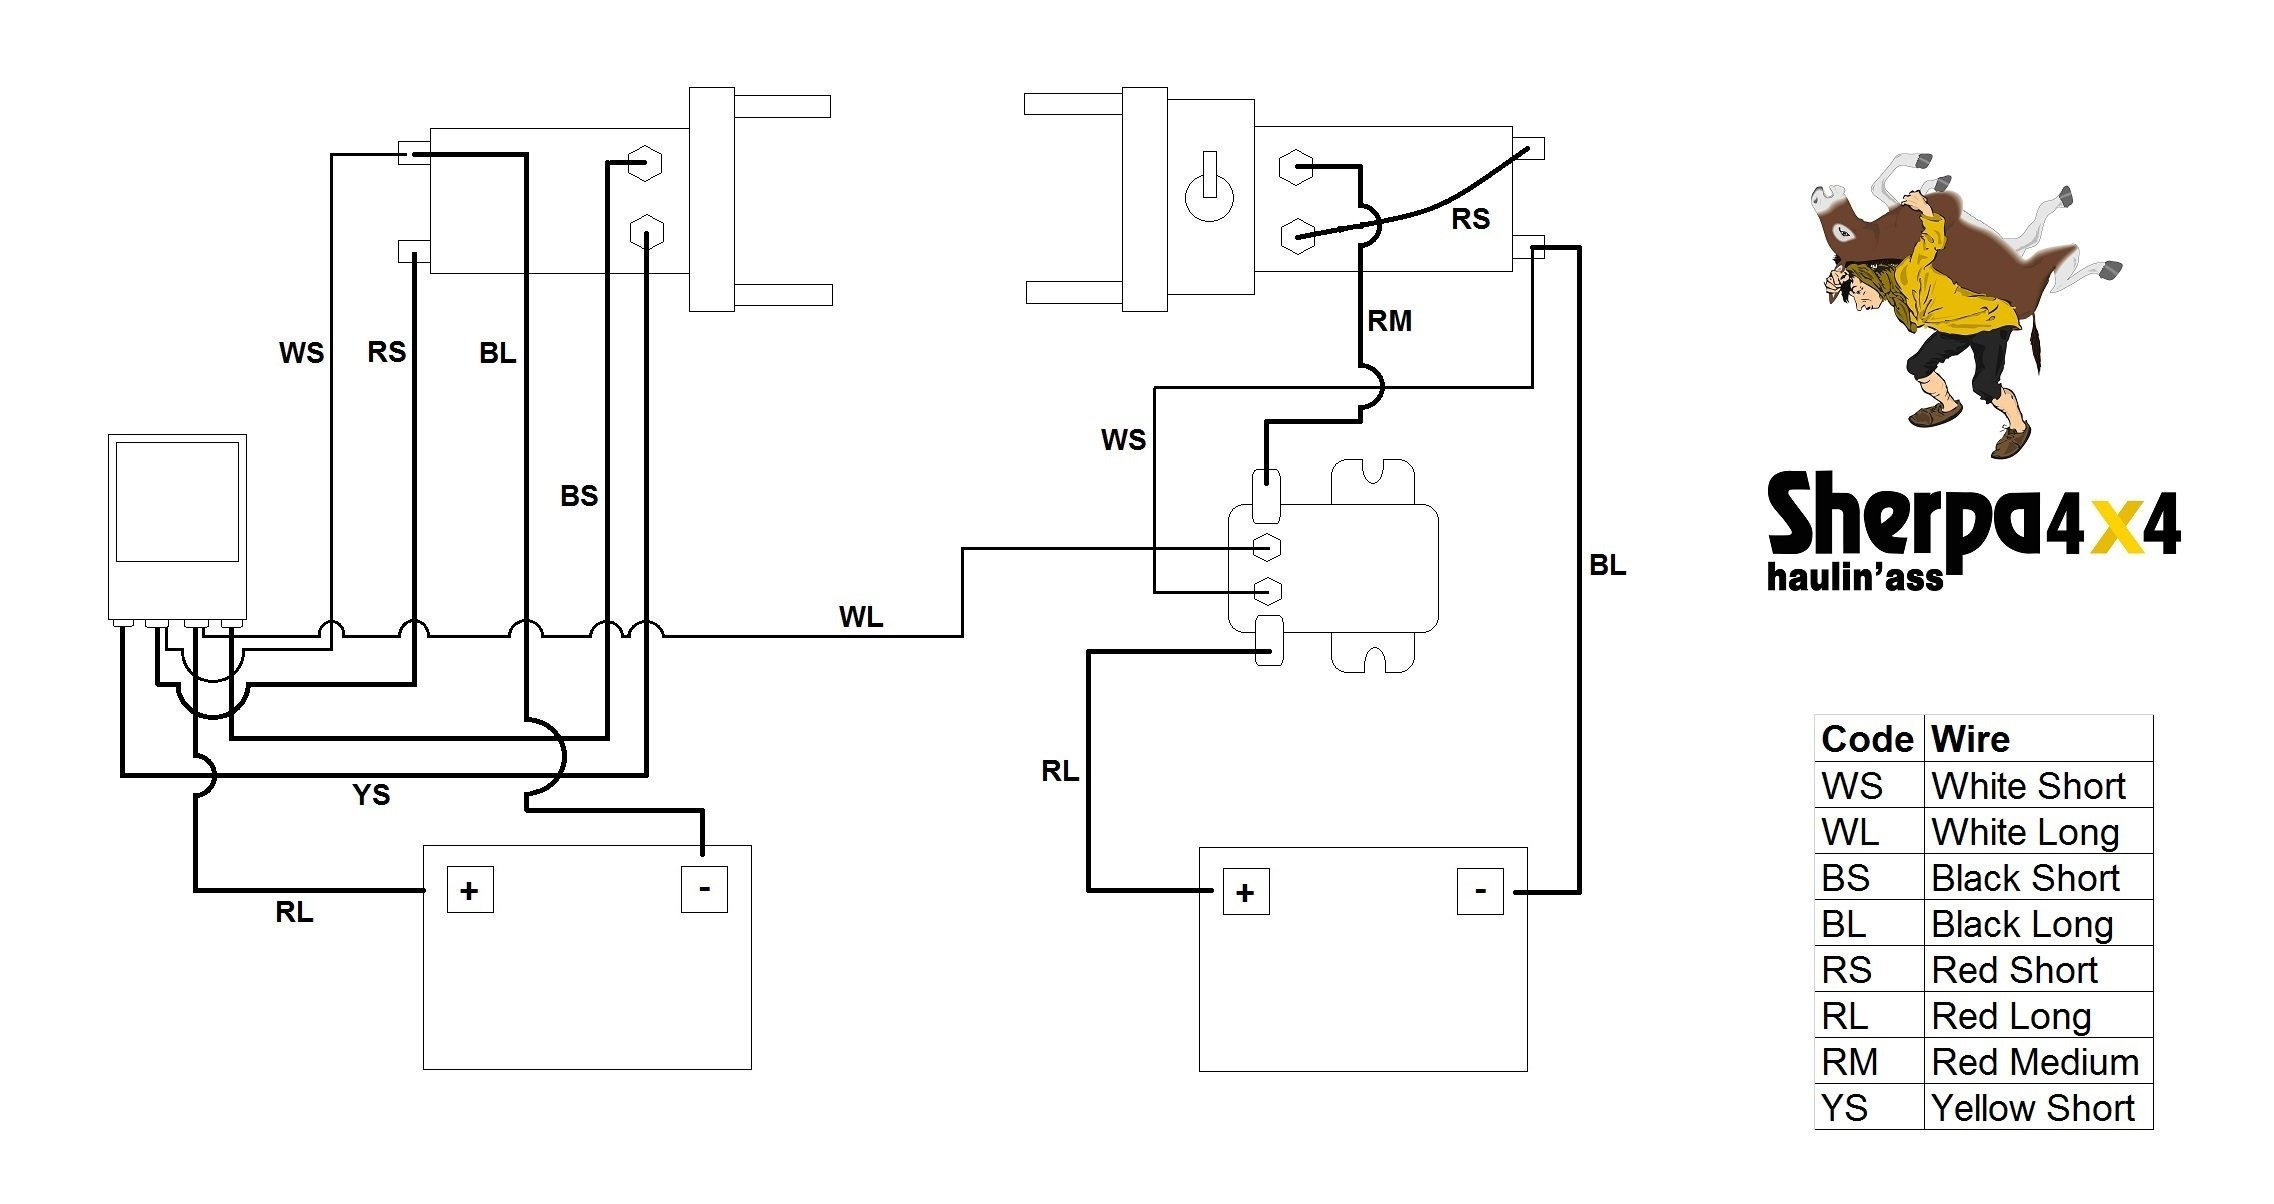 Wiring Diagram for Winch solenoid New Ac Winch Wiring Diagram Valid Badland Winch Wiring Diagram